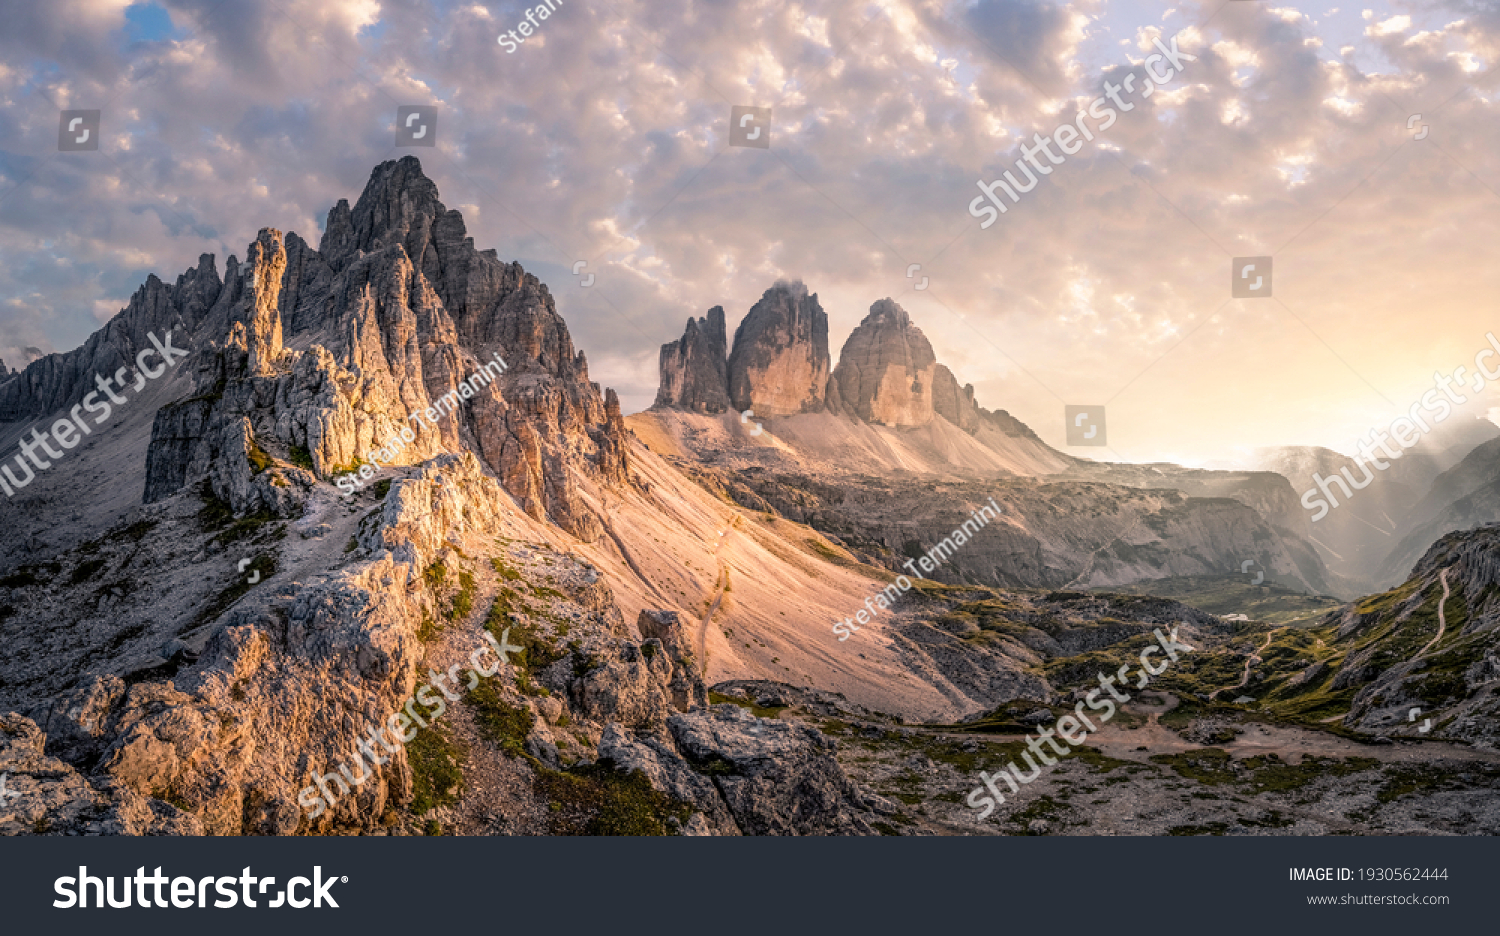 The famous "Tre cime di Lavaredo", situated between Veneto and South Tyrol, in northern Italy. Dolomites, South Tyrol, Italy. #1930562444